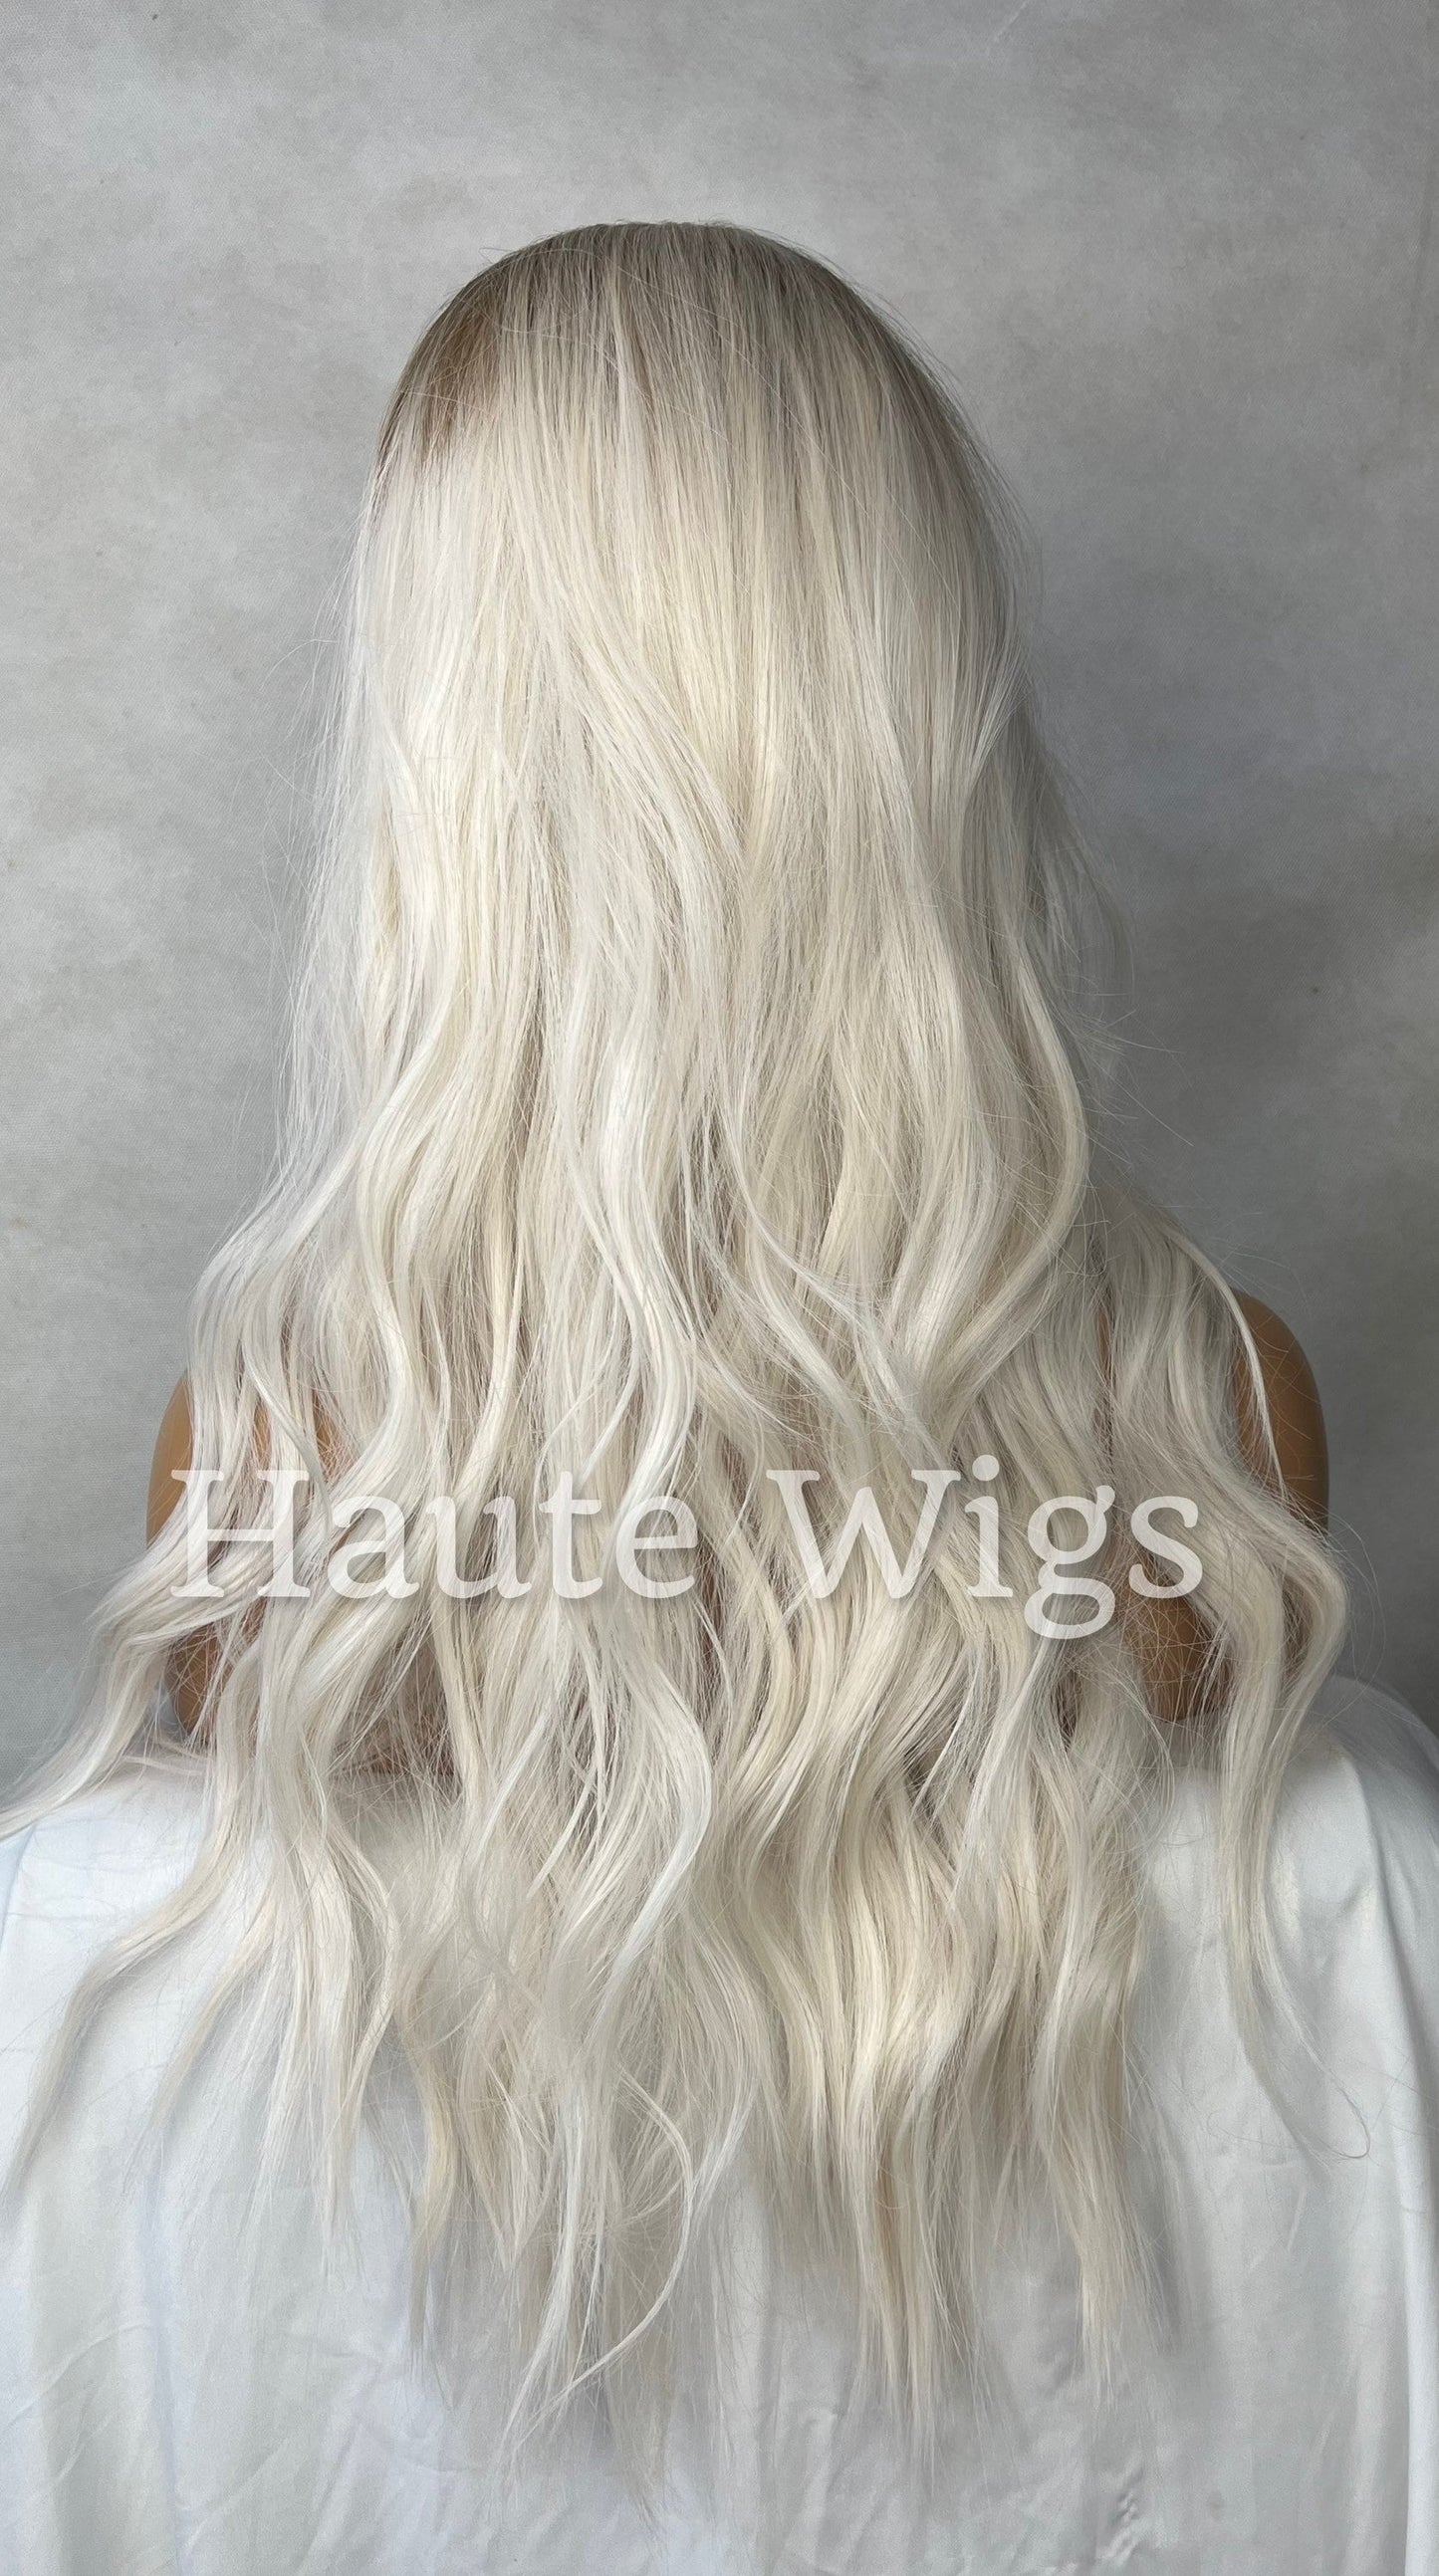 Homecoming - Ash Platinum Blonde Ombré streaks 22 Inch Long Wig Wavy NO Lace Fringe Bangs Womens Wig pretty Gift for her haute wigs